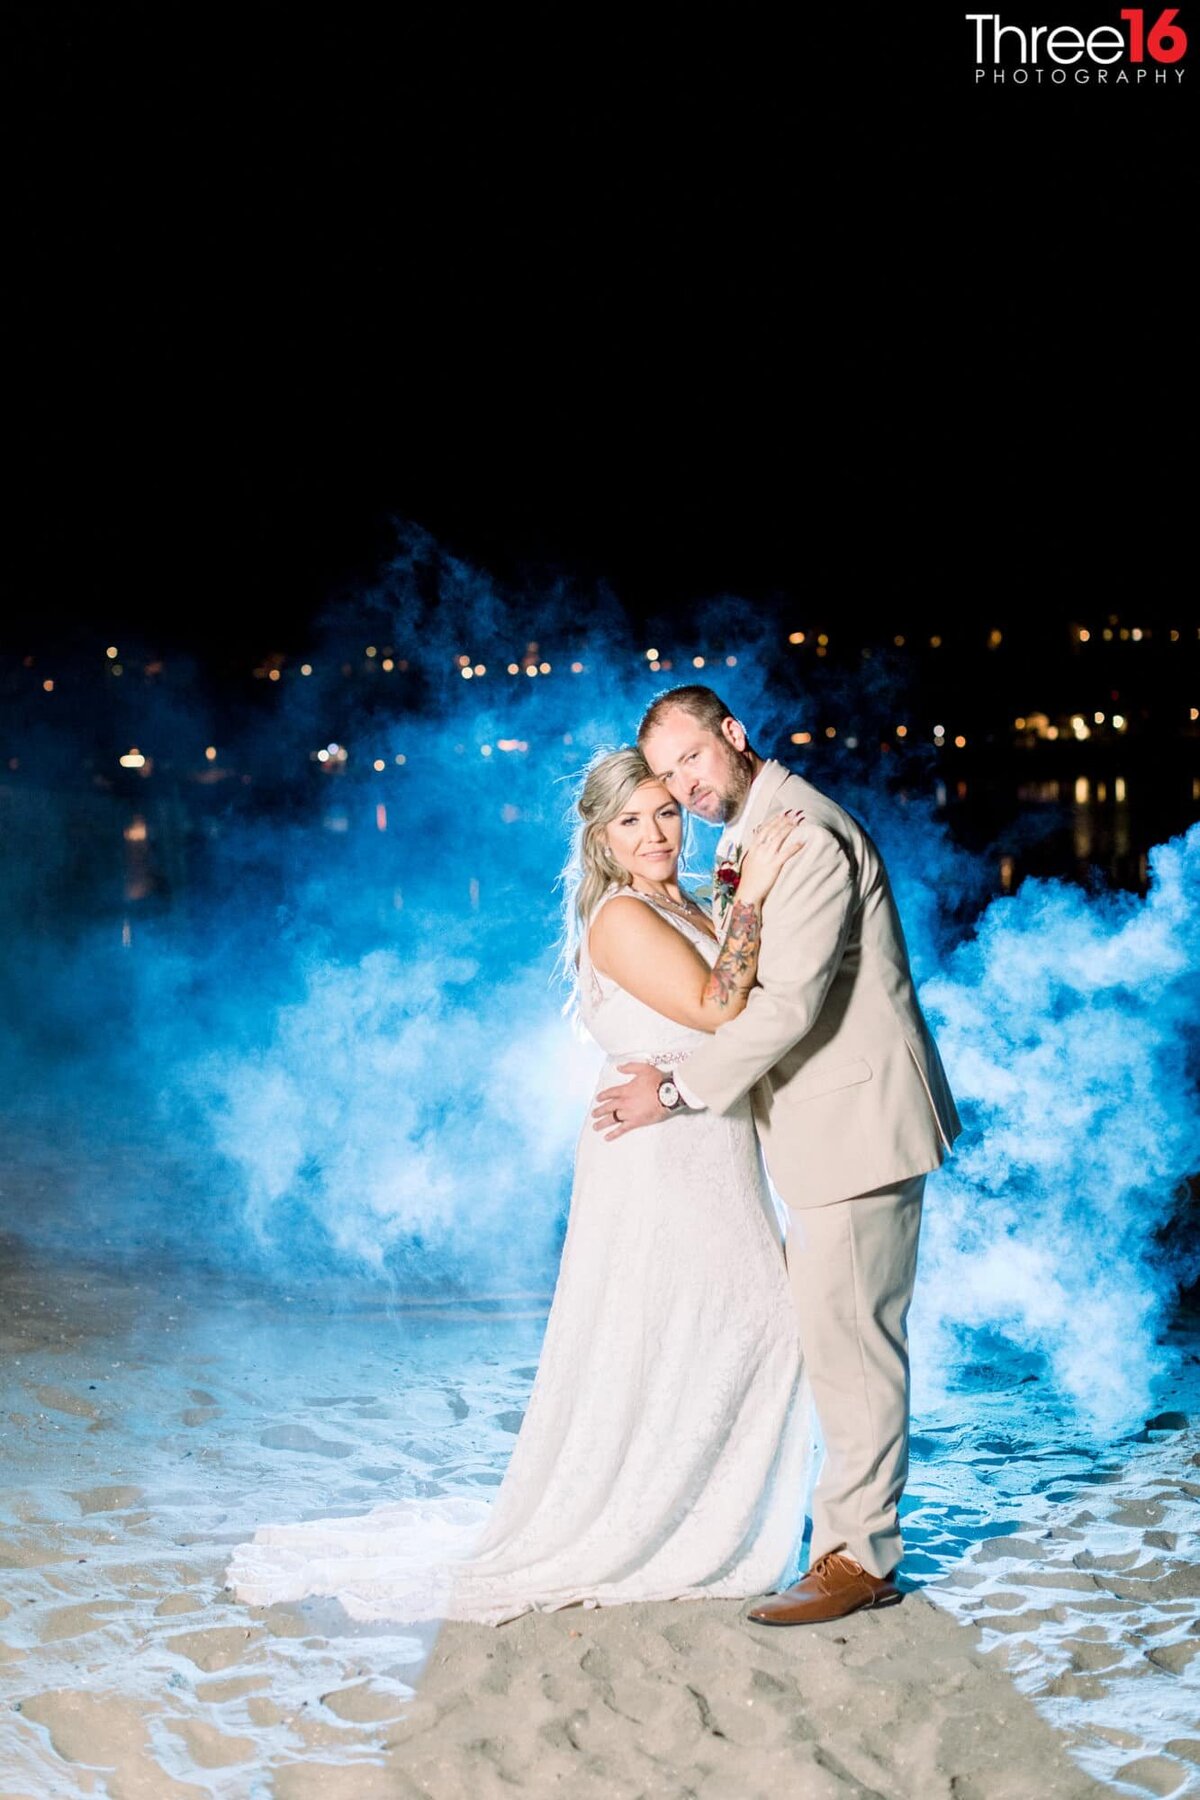 Bride and Groom cozy up with cheek to cheek during an evening photo shoot with a blue mist behind them